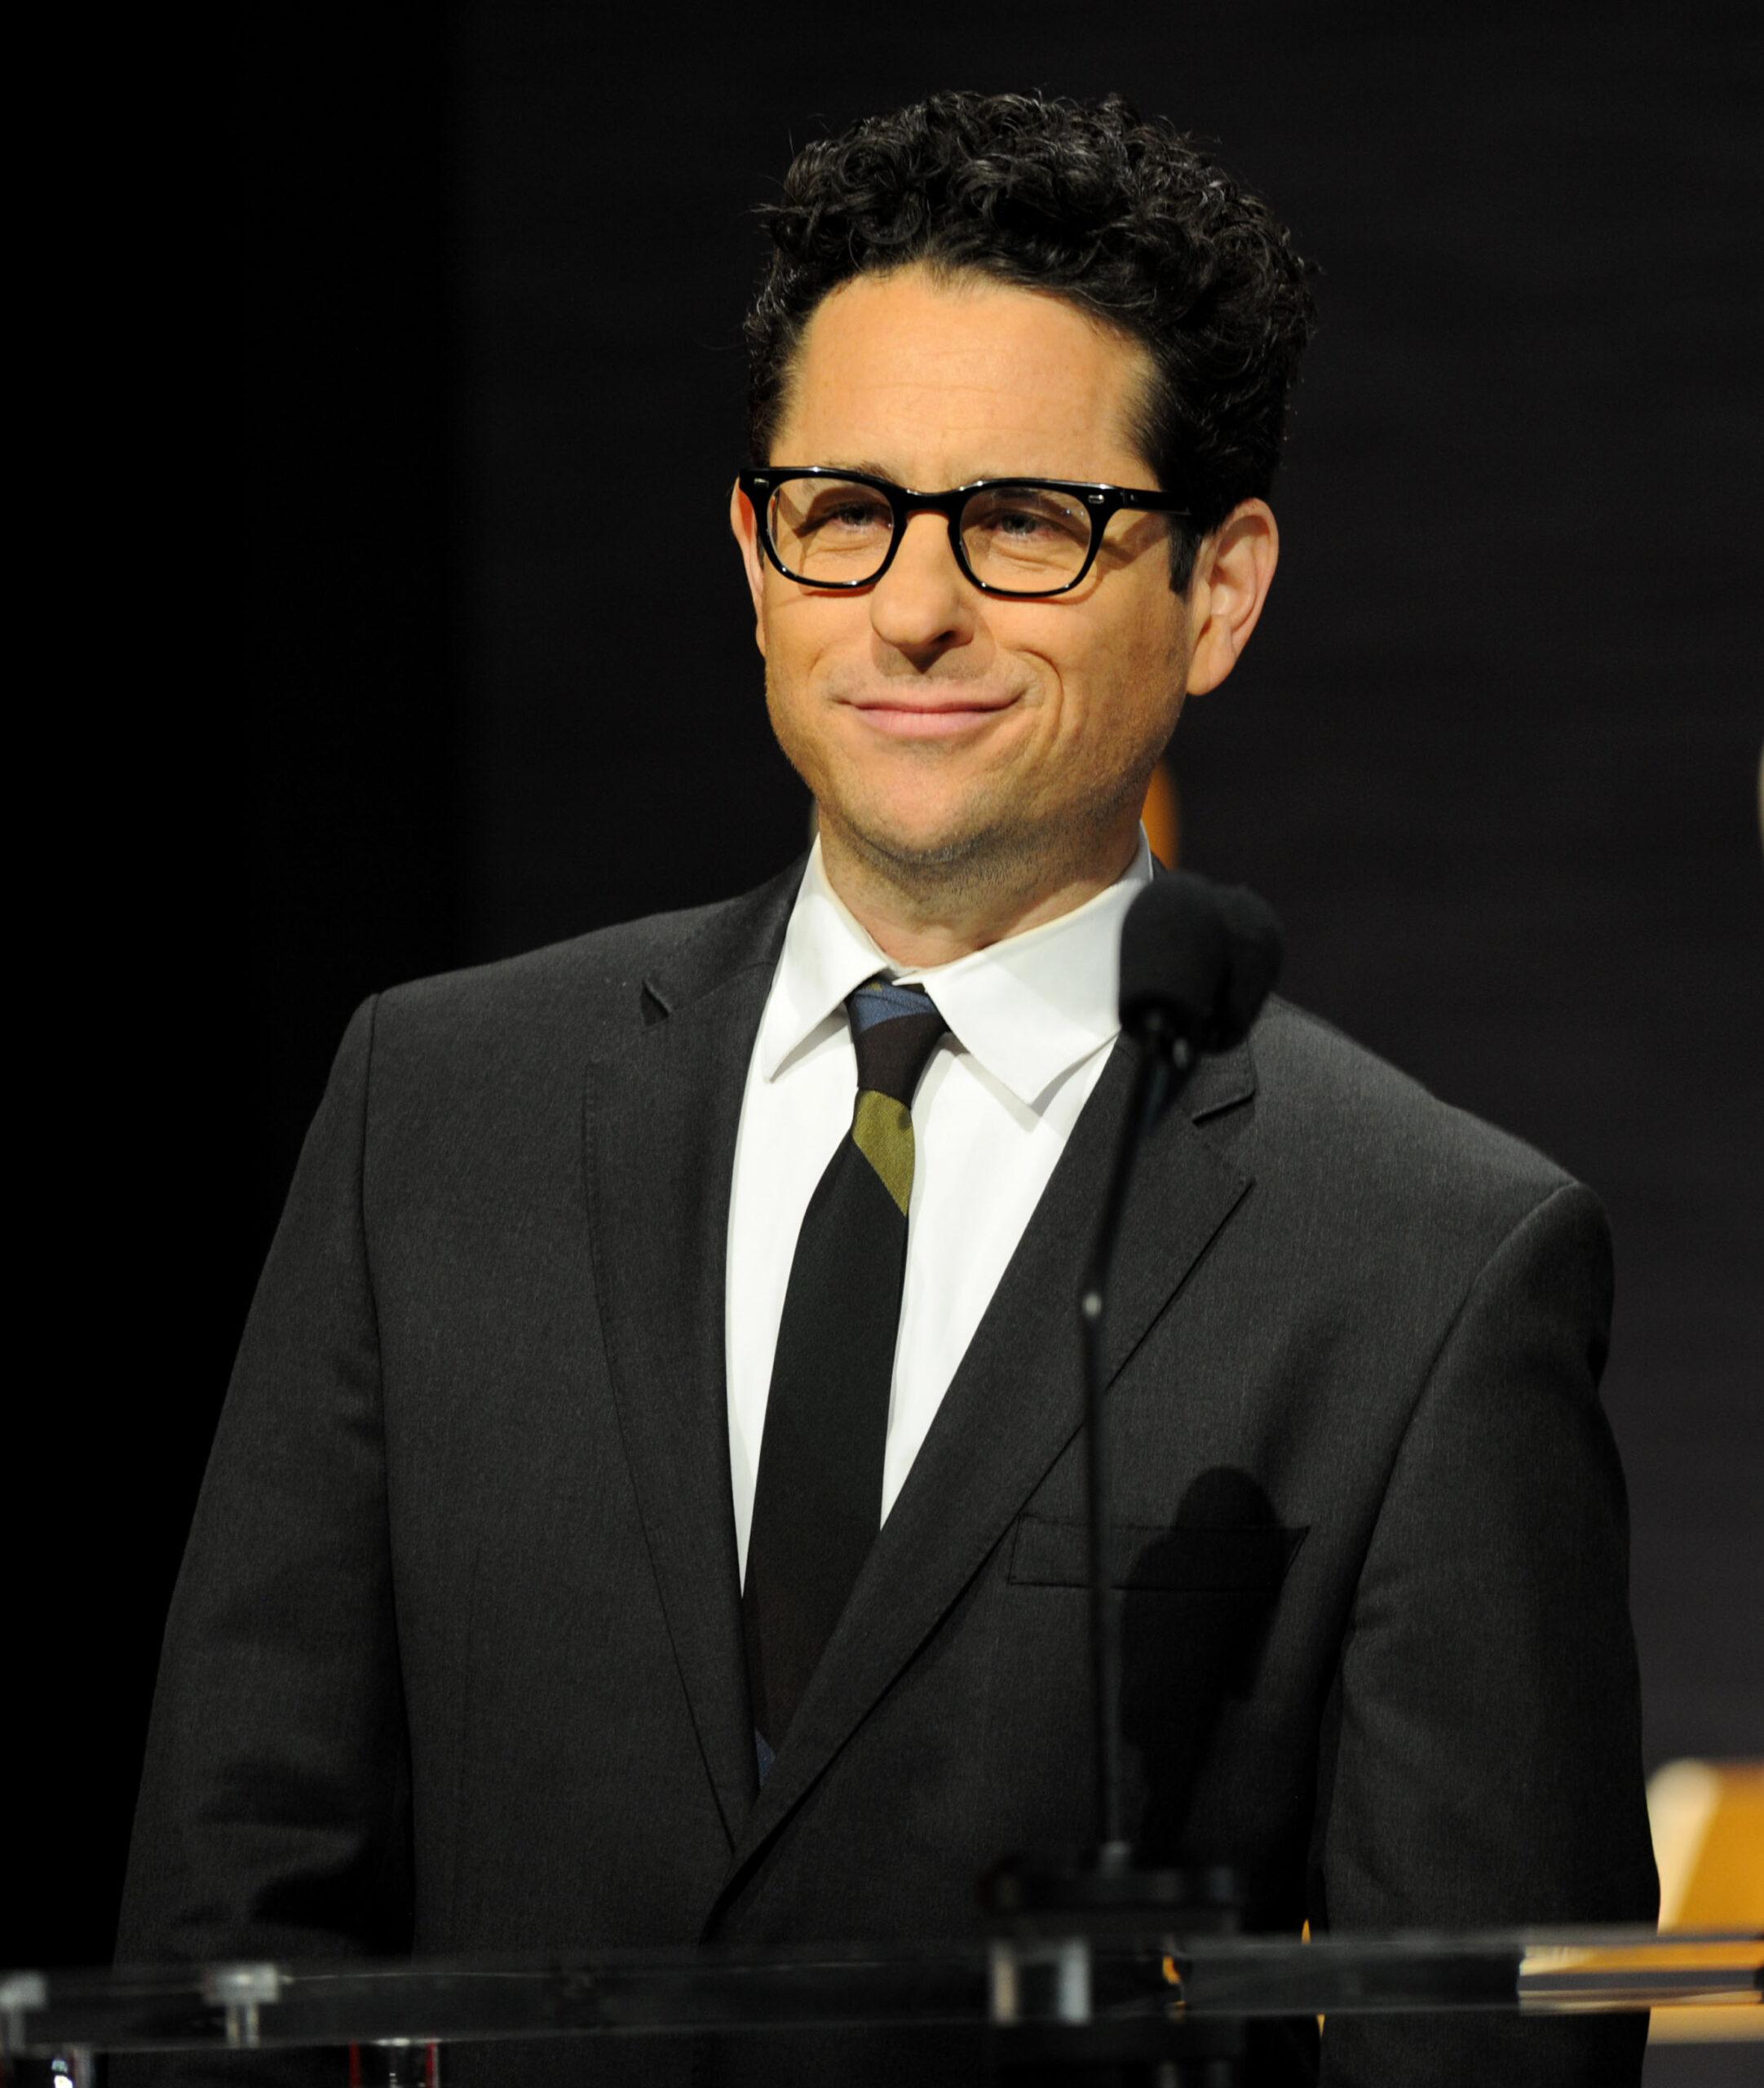 JJ Abrams and Alfonso Cuaron present the Oscar nominations in Beverly Hills!